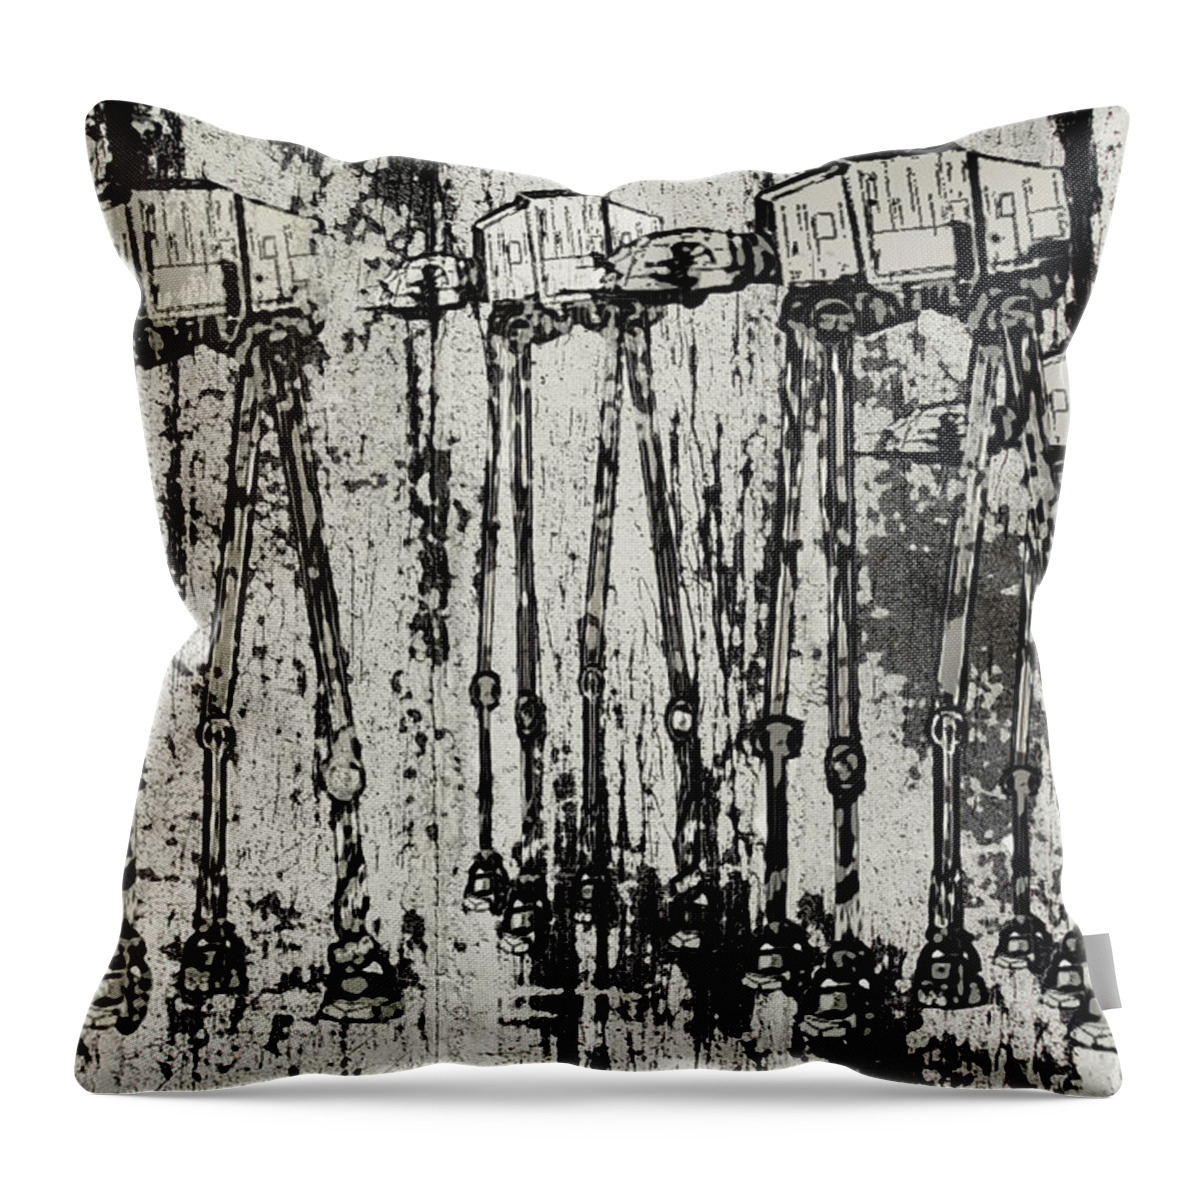 Concrete Throw Pillow featuring the digital art At - At Herd by No Alphabet